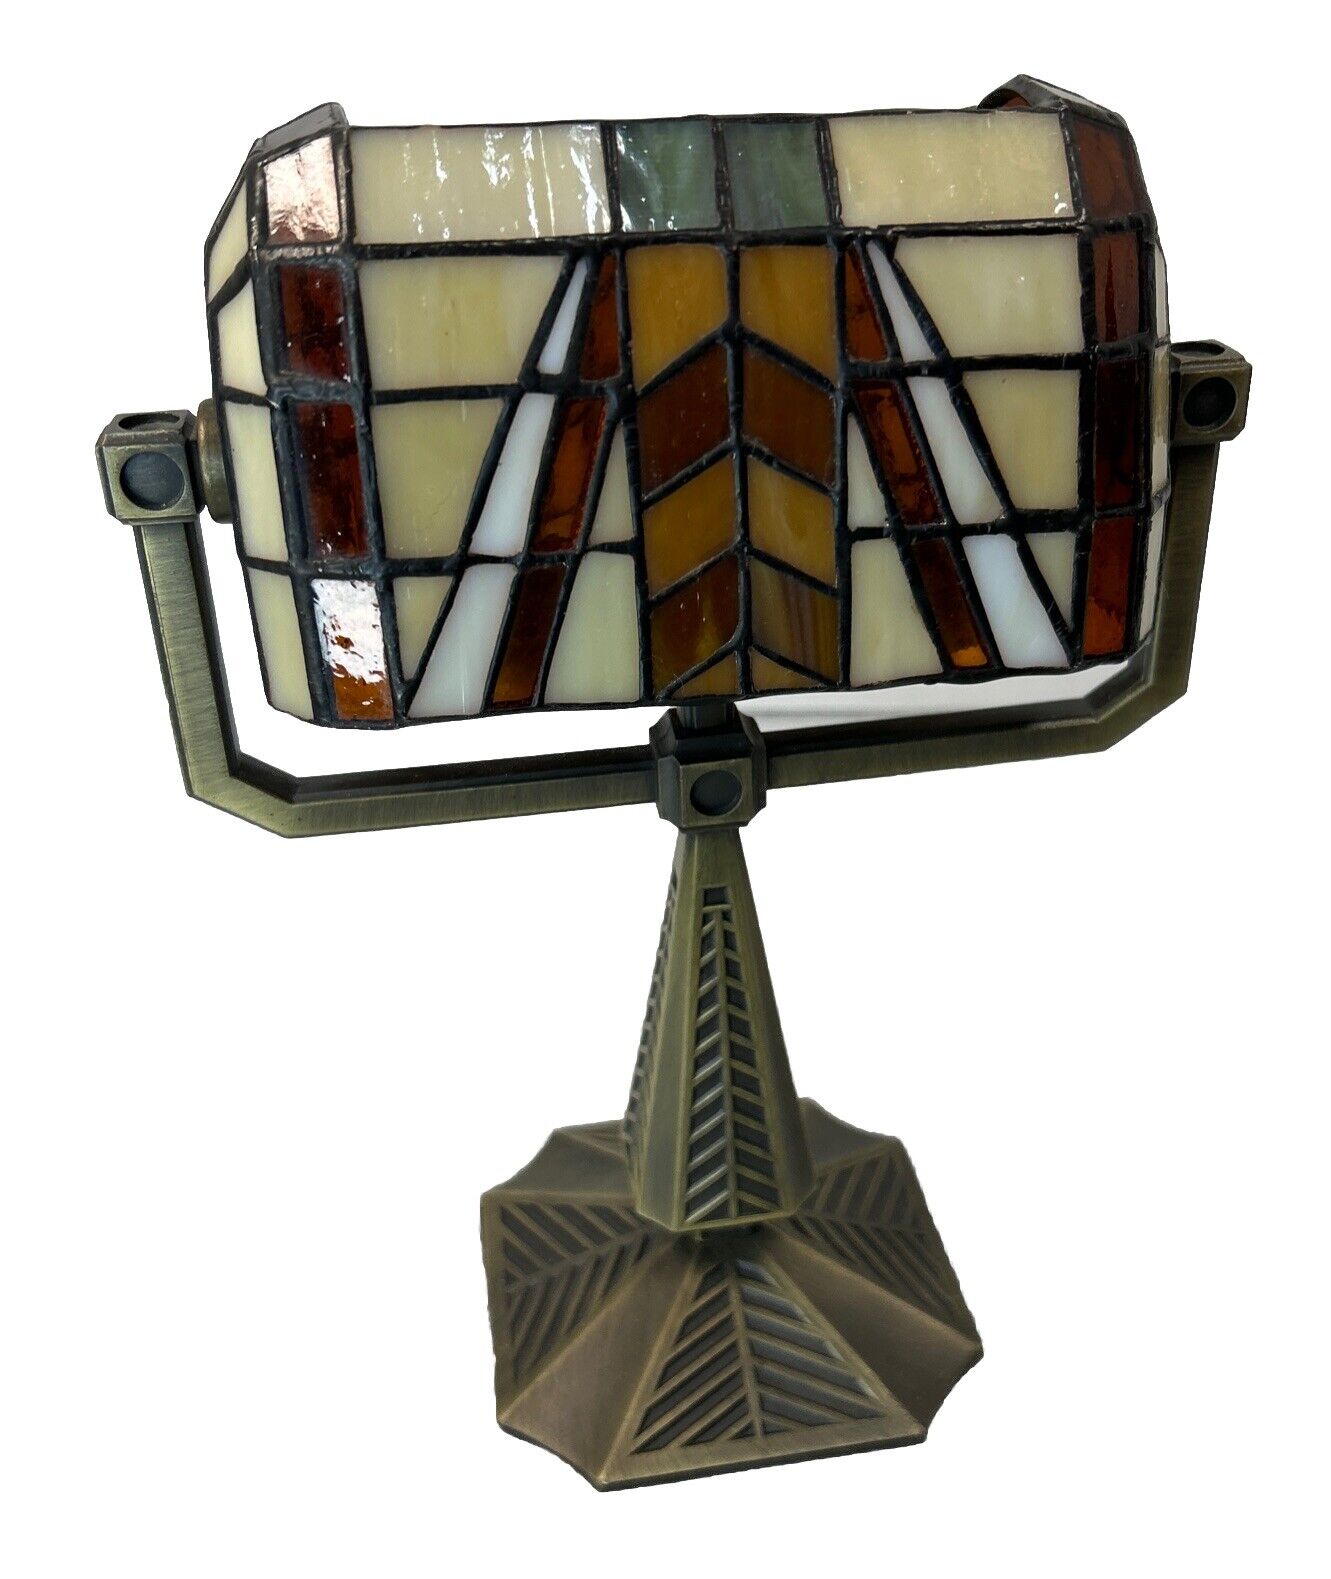 PartyLite Deco Stained Glass Tiffany Style Double Tealight Holder Banker Lamp